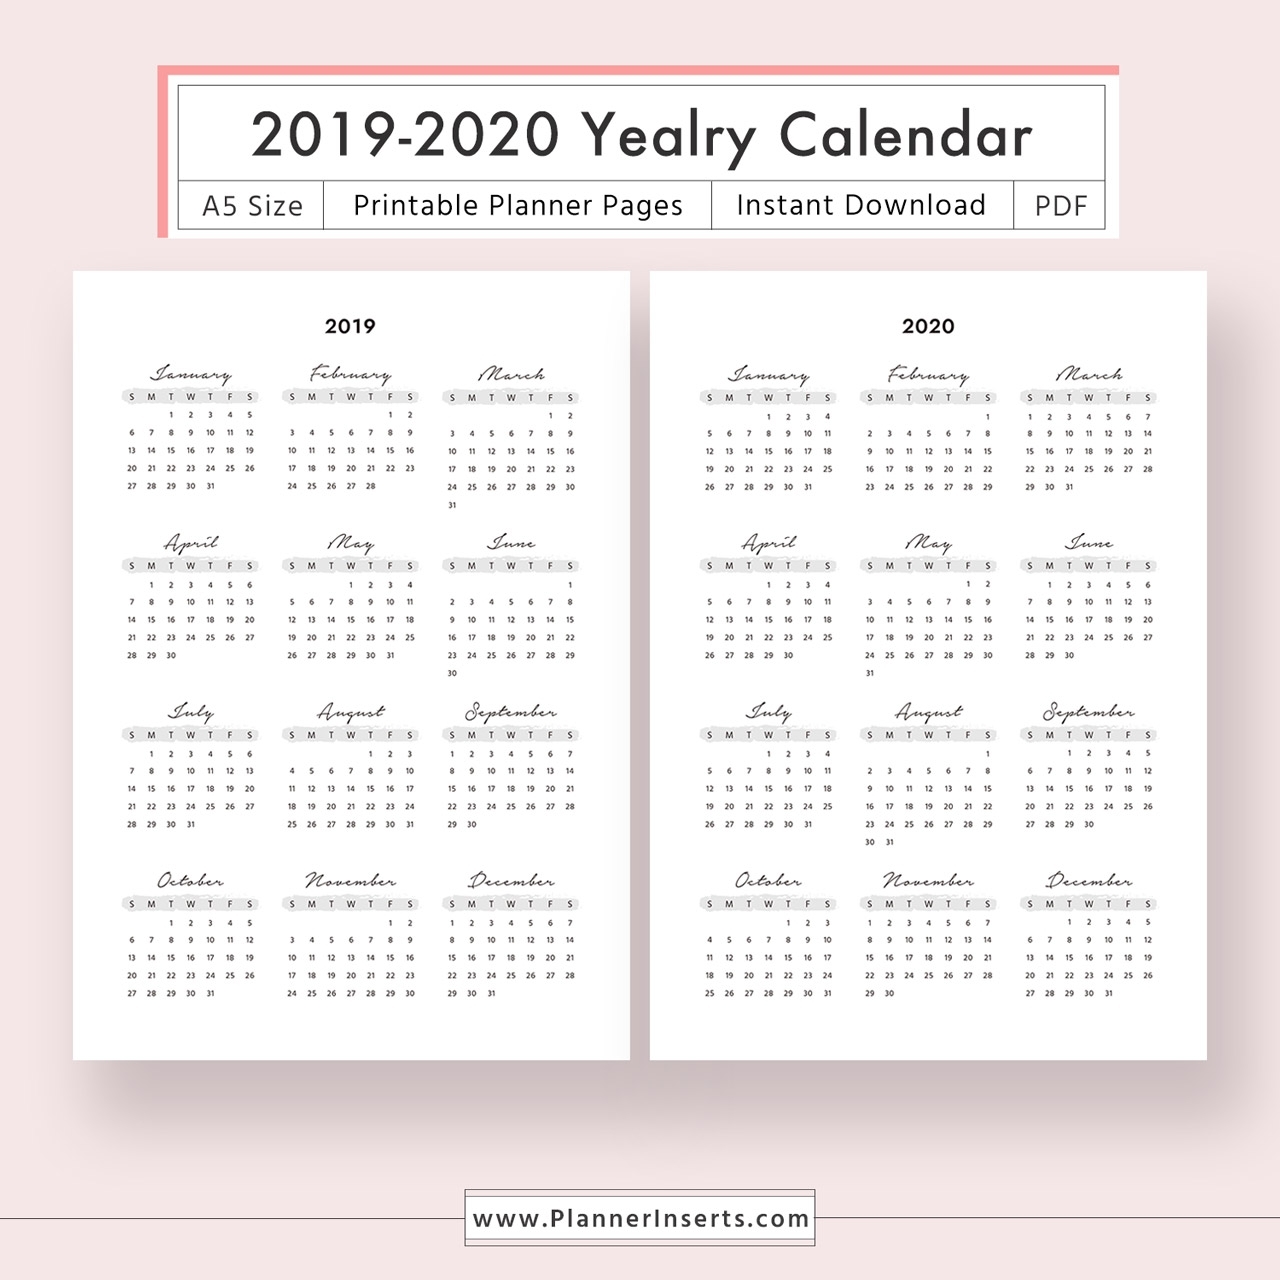 Yearly Calendar 2019 2020 For Unlimited Instant Download - Digital  Printable Planner Inserts In .pdf Format - Filofax A5 - Year At A Glance,  Yearly